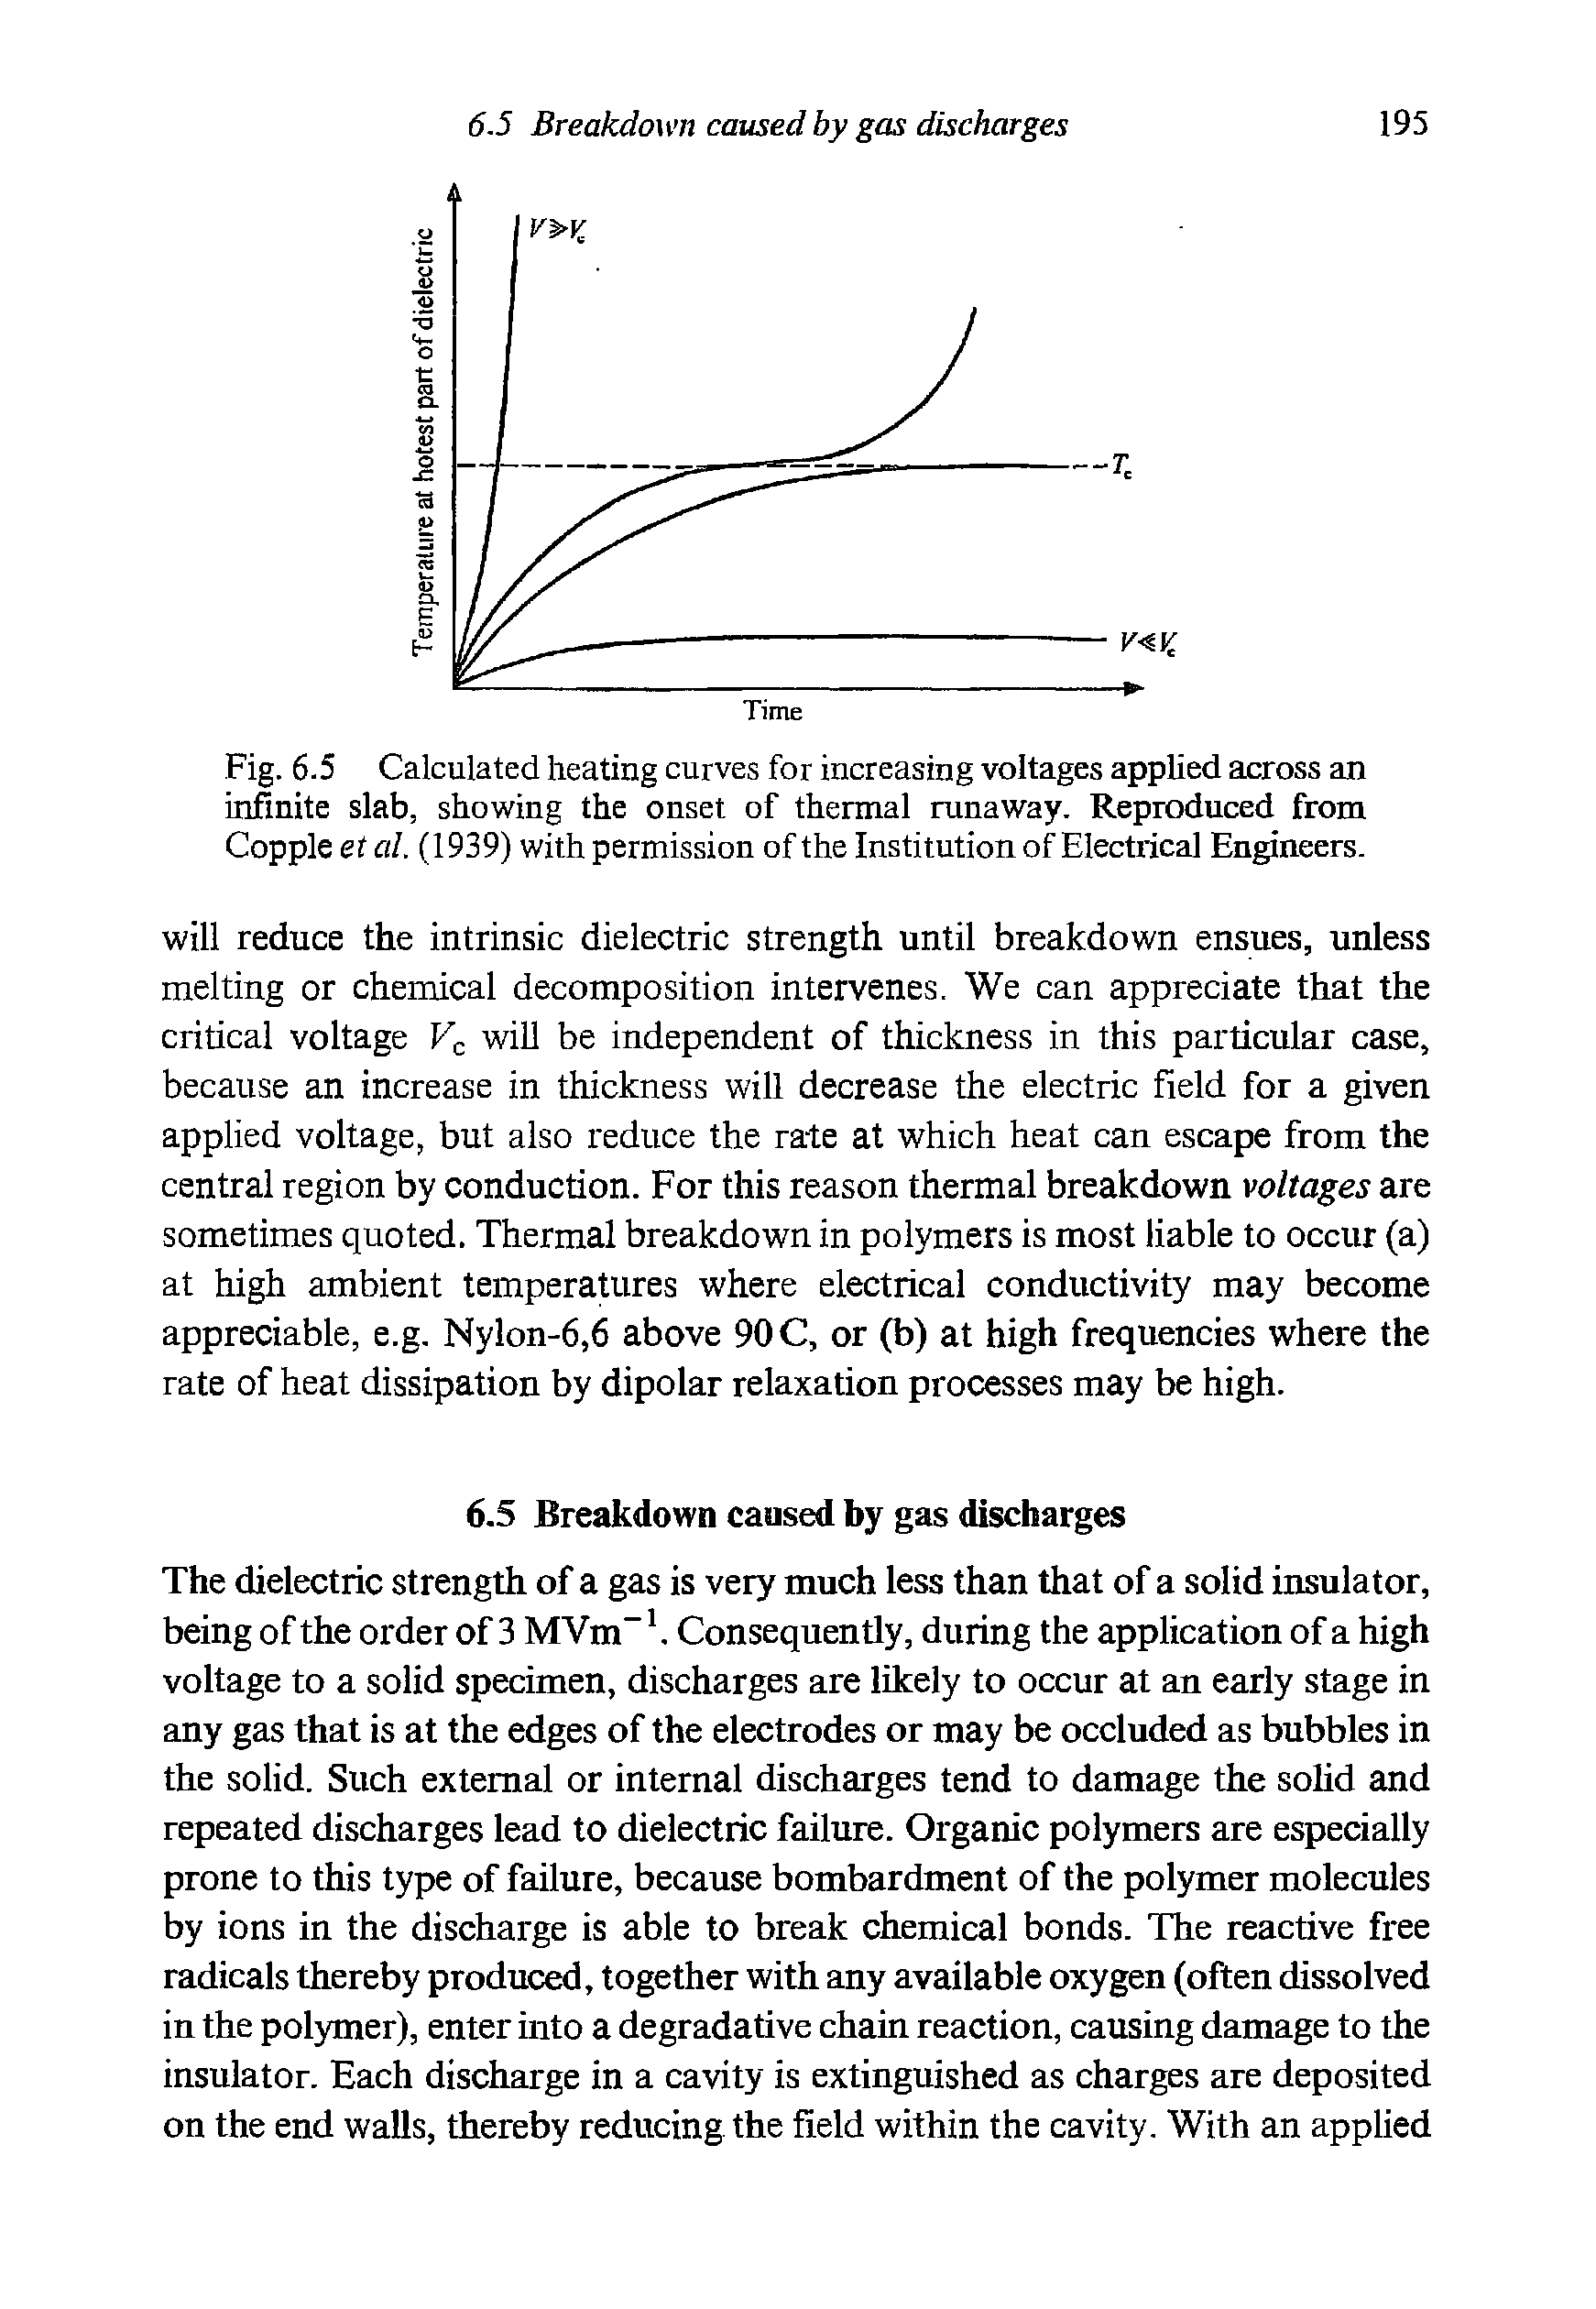 Fig. 6.5 Calculated heating curves for increasing voltages applied across an infinite slab, showing the onset of thermal runaway. Reproduced from Copple et ctl. (1939) with permission of the Institution of Electrical Engineers.